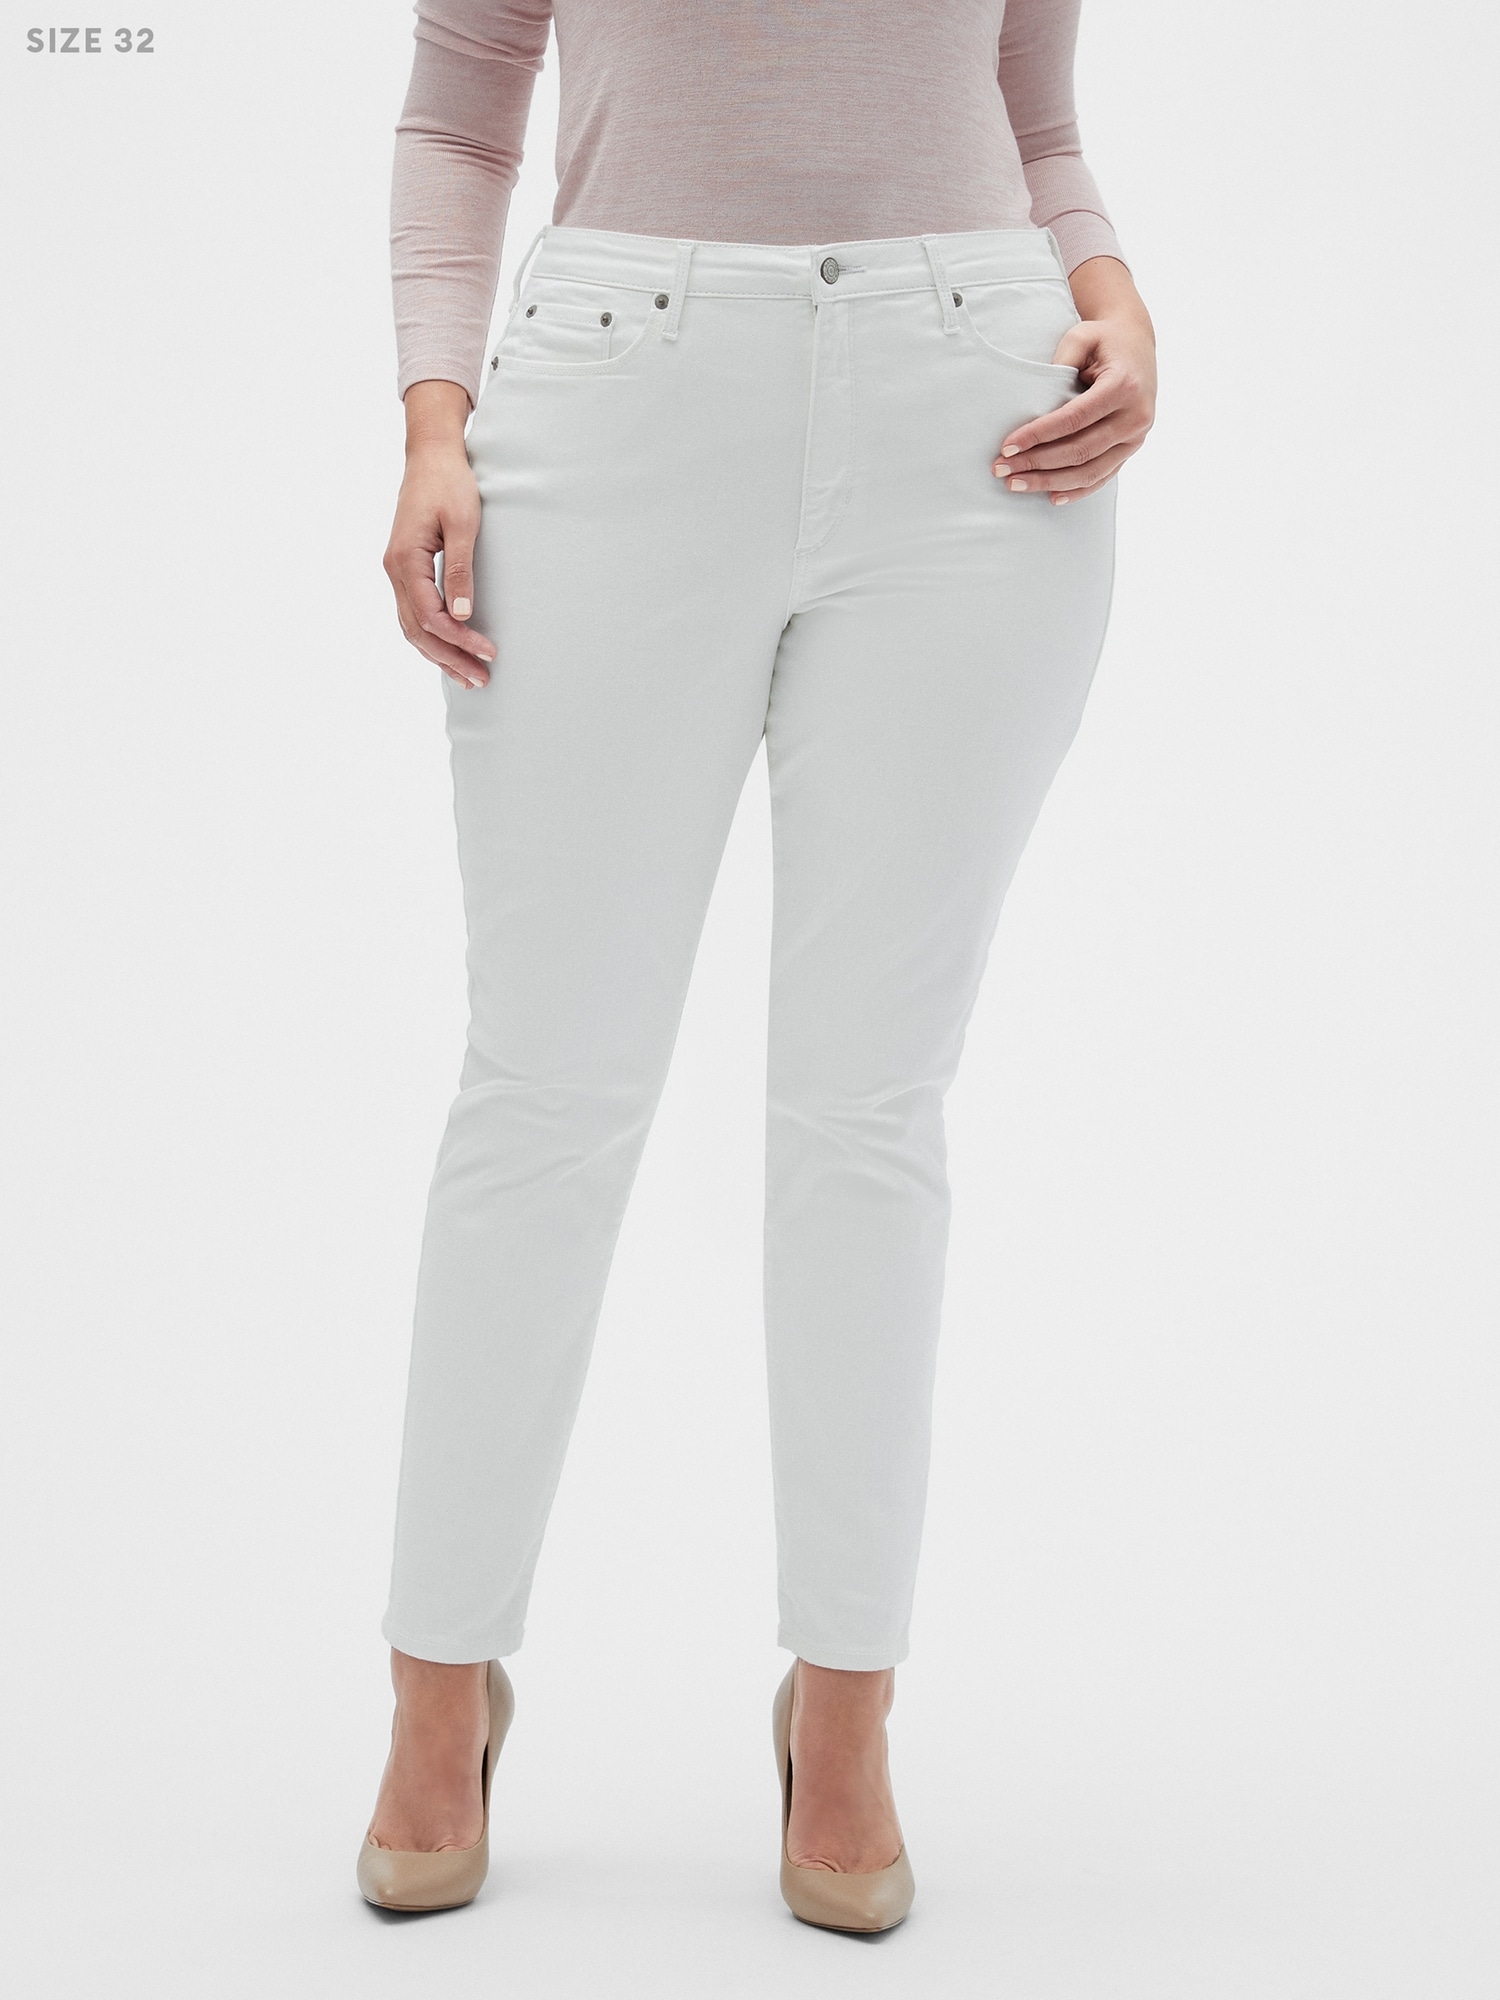 Curvy Fit Sculpt Stain Resistant White Skinny Jean